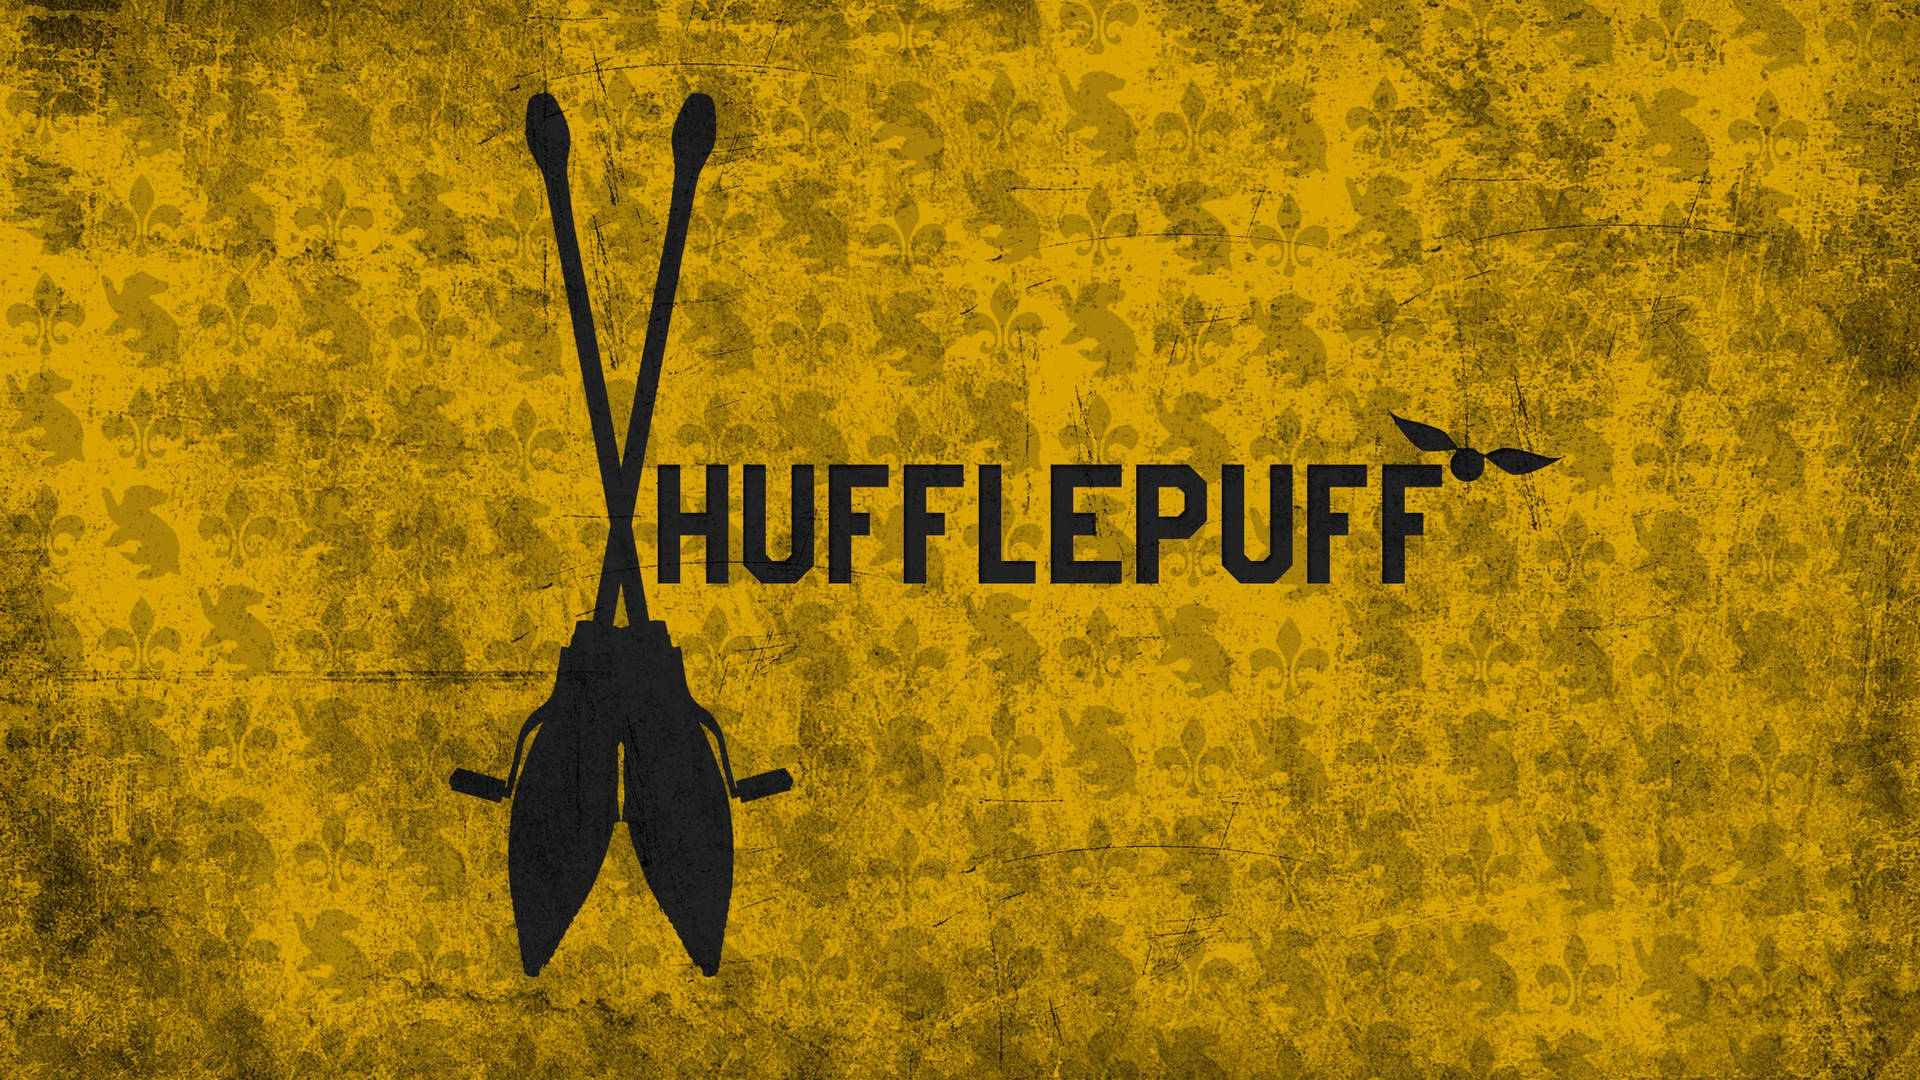 Harry Potter Houses Hufflepuff Quidditch Background